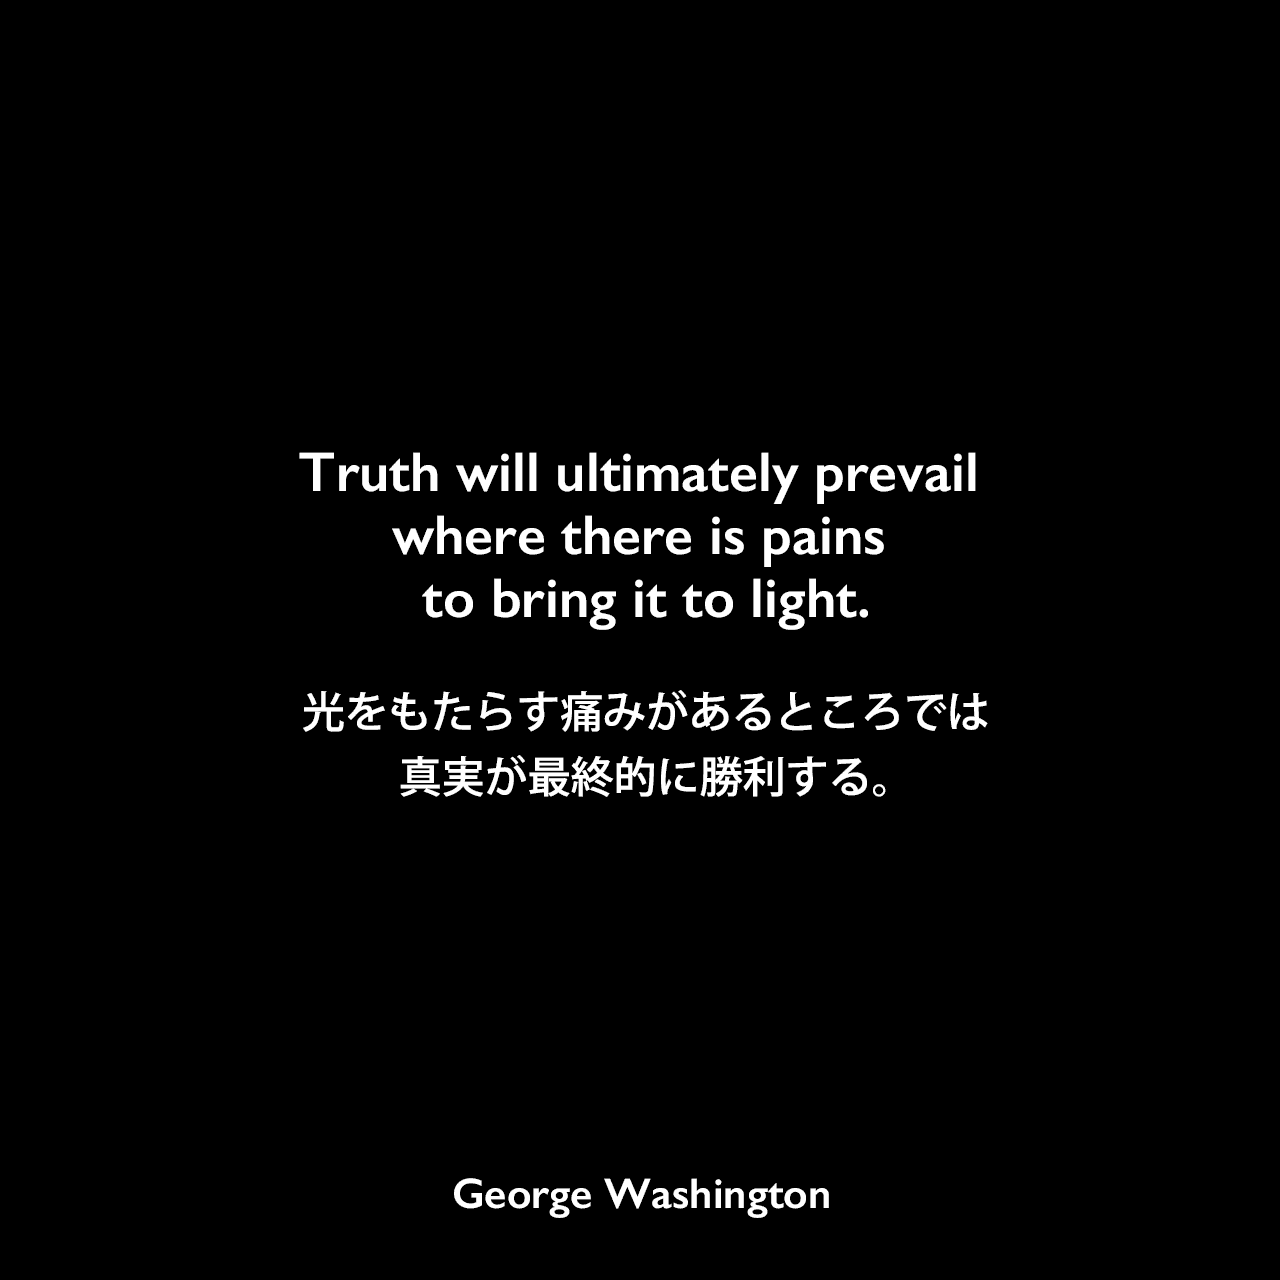 Truth will ultimately prevail where there is pains to bring it to light.光をもたらす痛みがあるところでは、真実が最終的に勝利する。George Washington